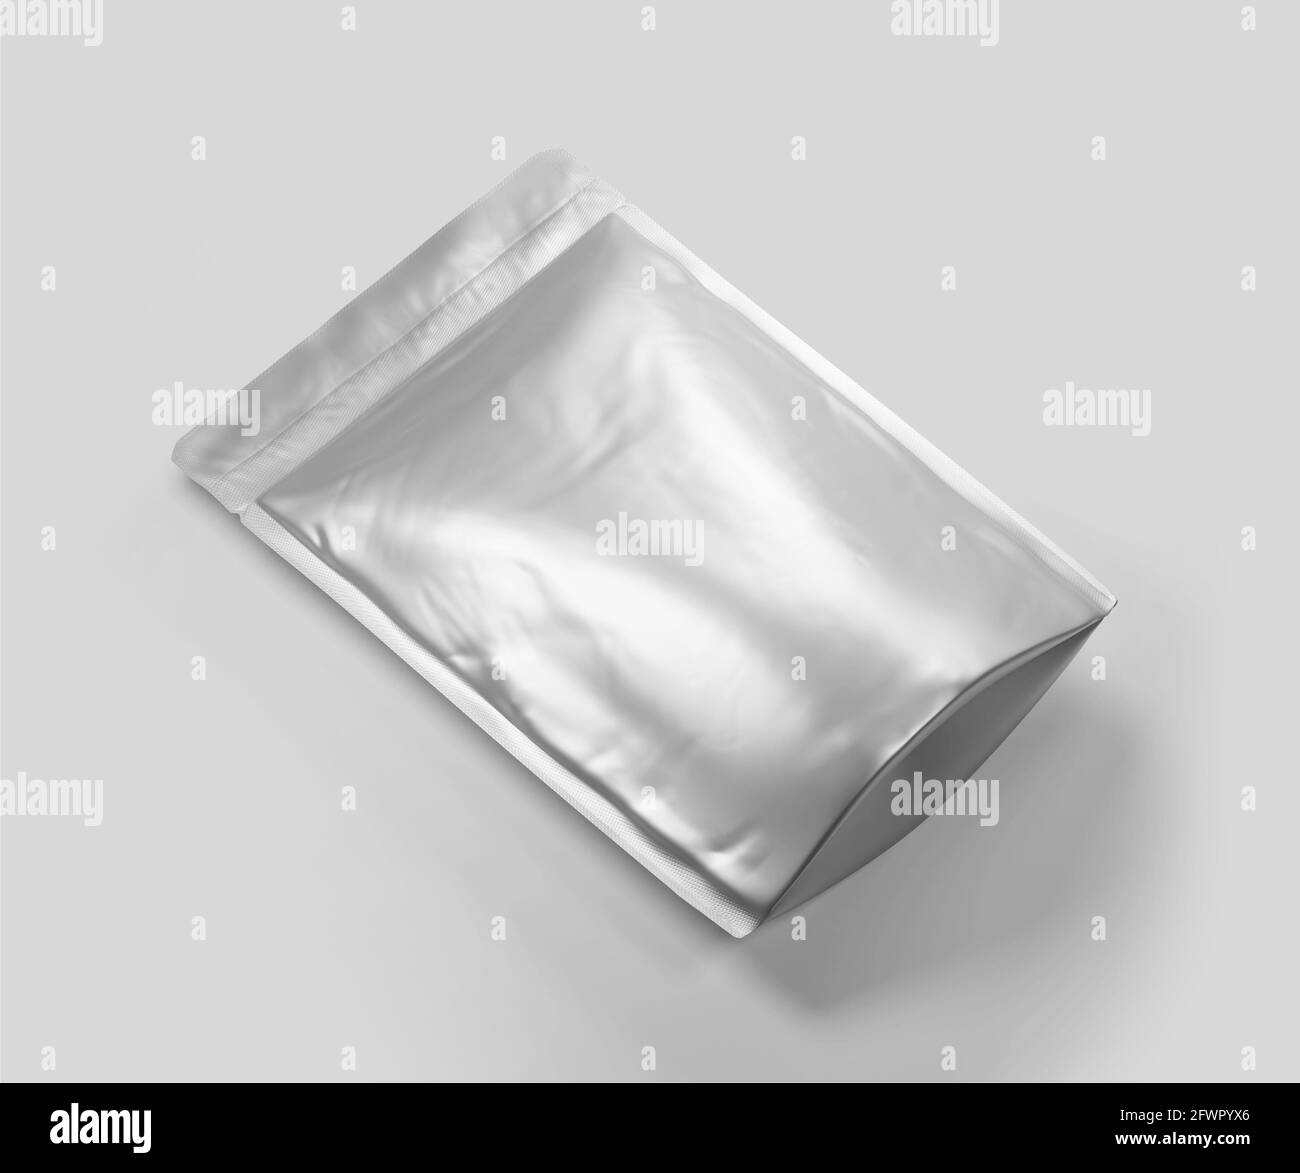 Blank Foil plastic pouch coffee bag, white Aluminium coffee or juice package 3d rendering isolated on light background Stock Photo